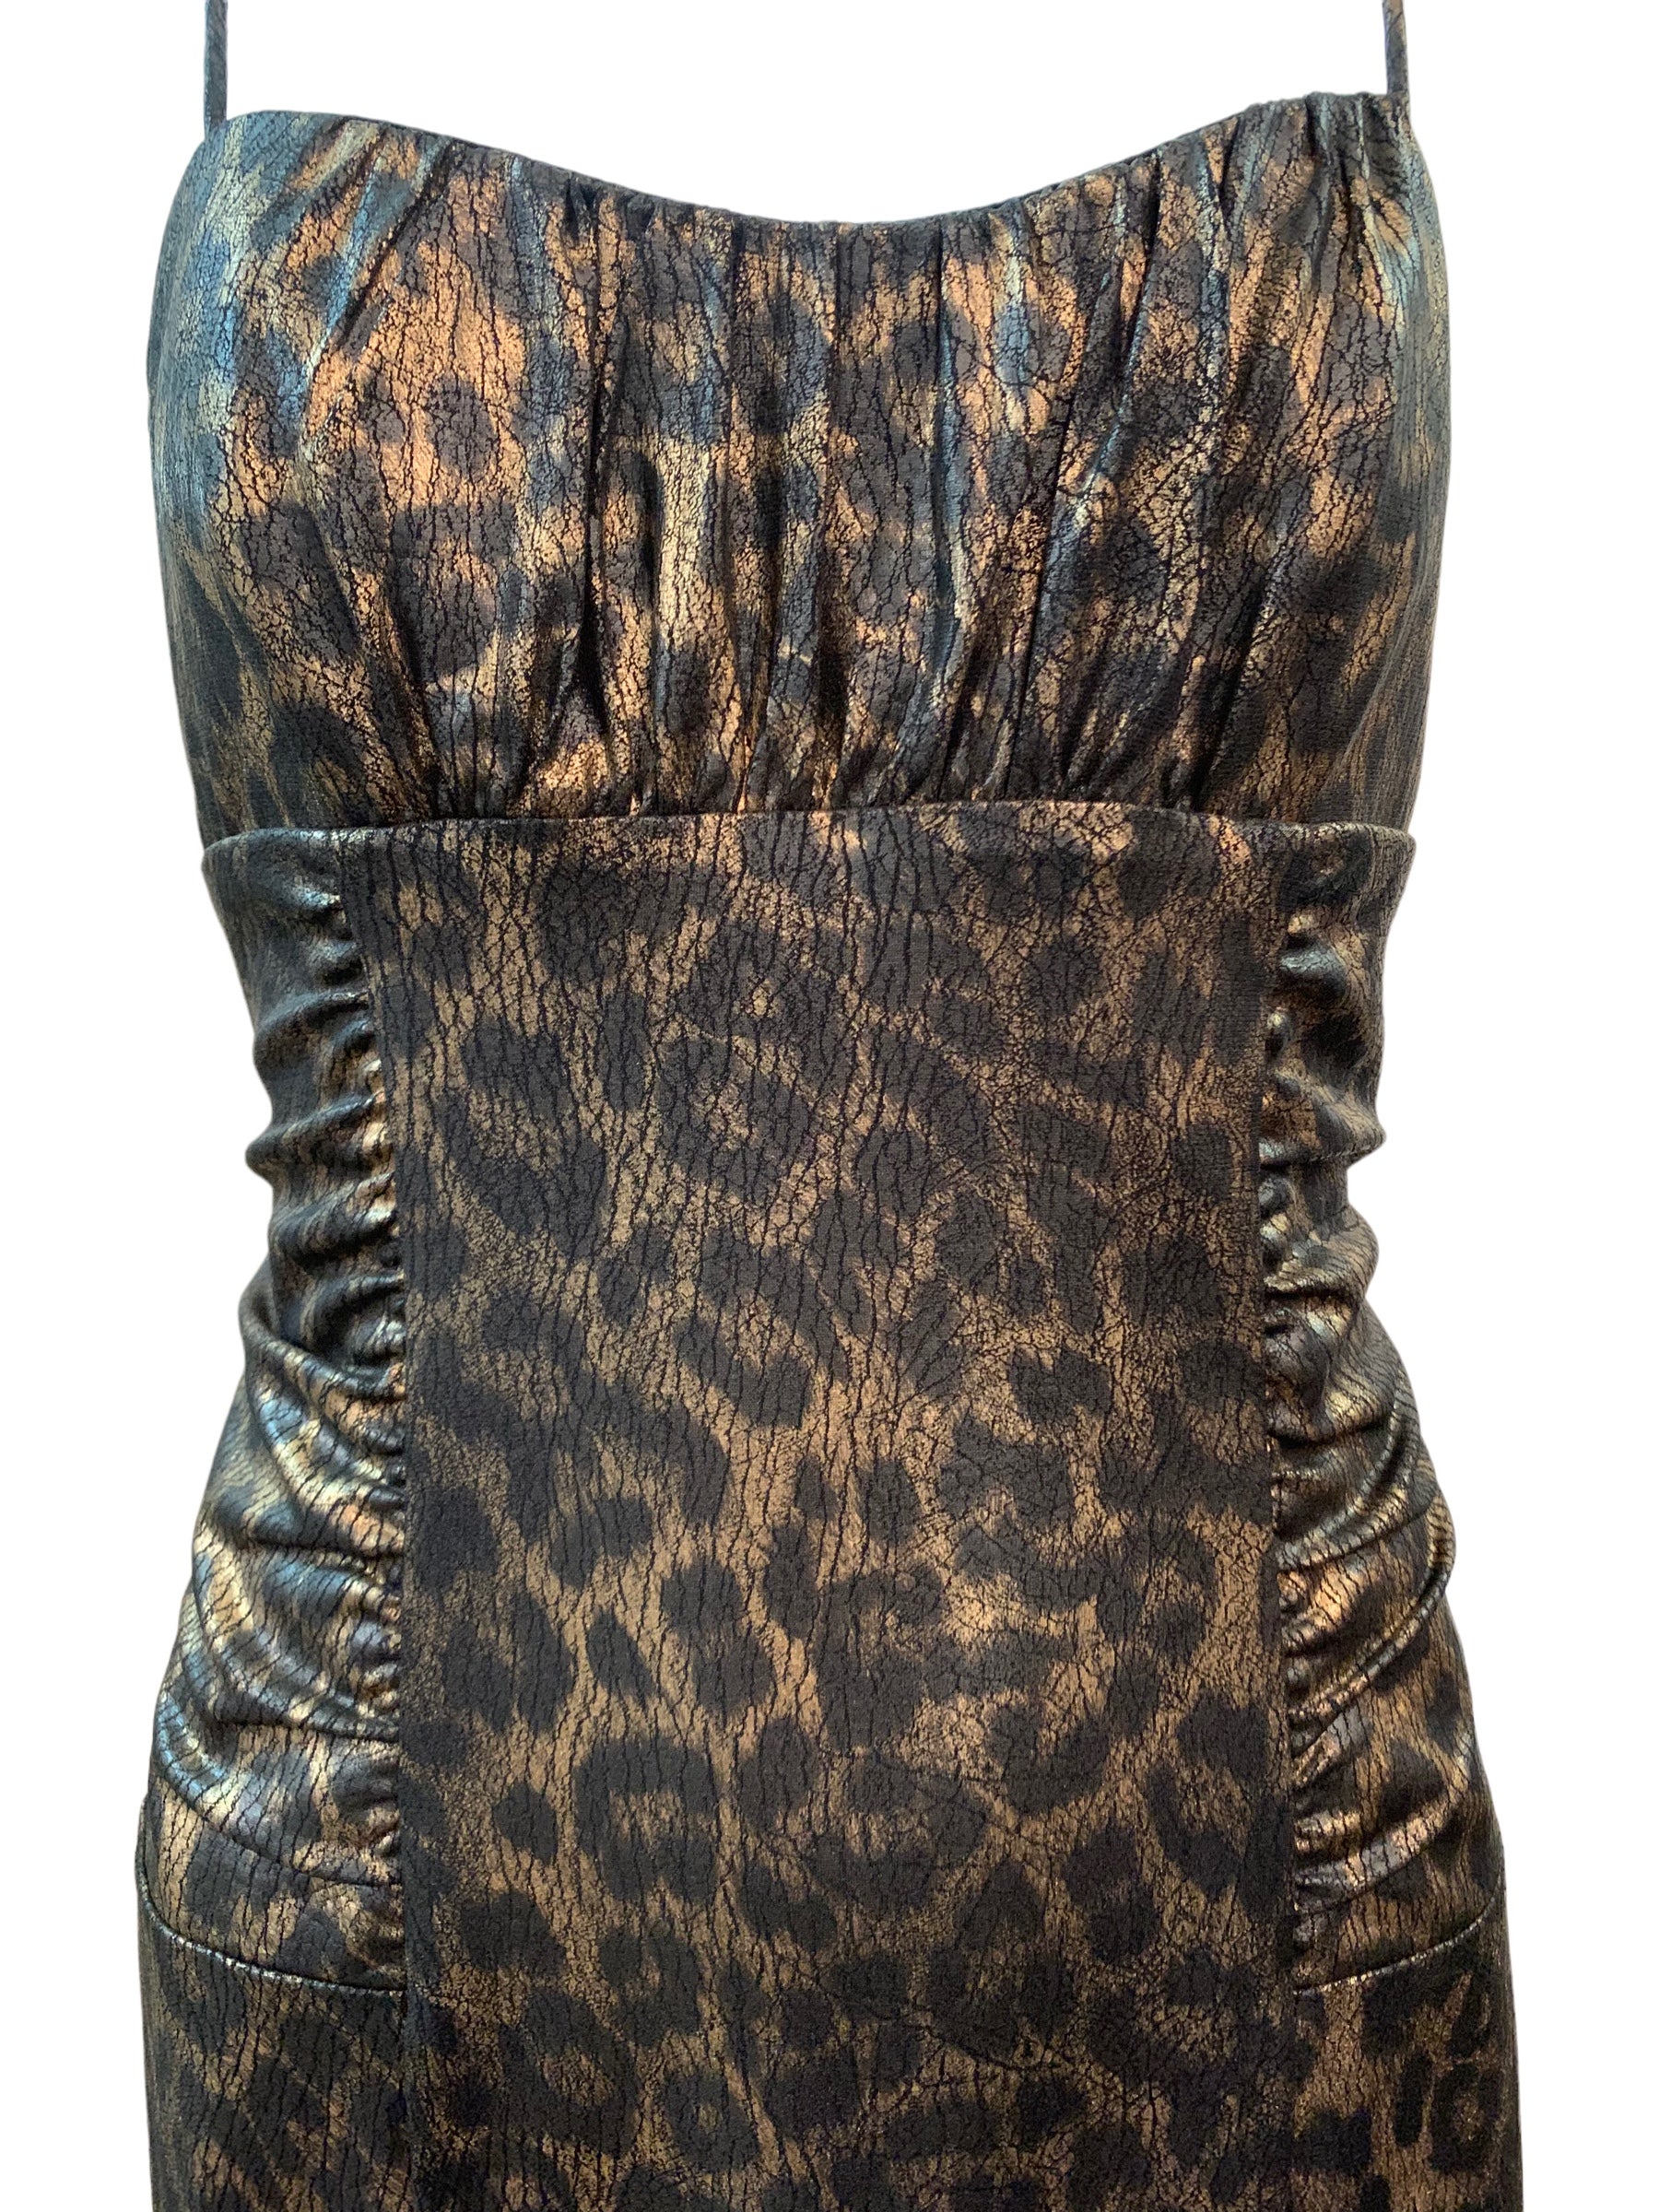 D&G  Leopard Print Body Con Dress FRONT 4 of 6